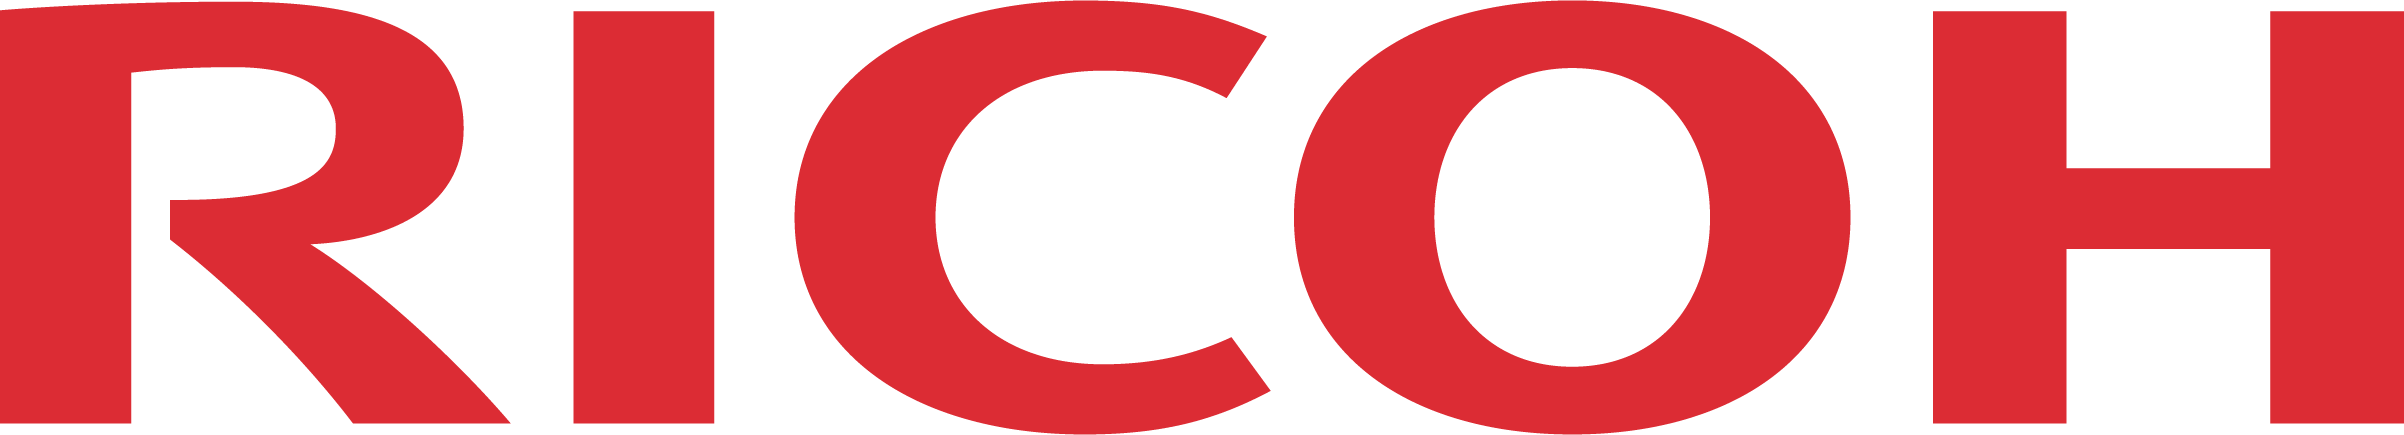 Red Ricoh logo on Transparent Background [Converted].png